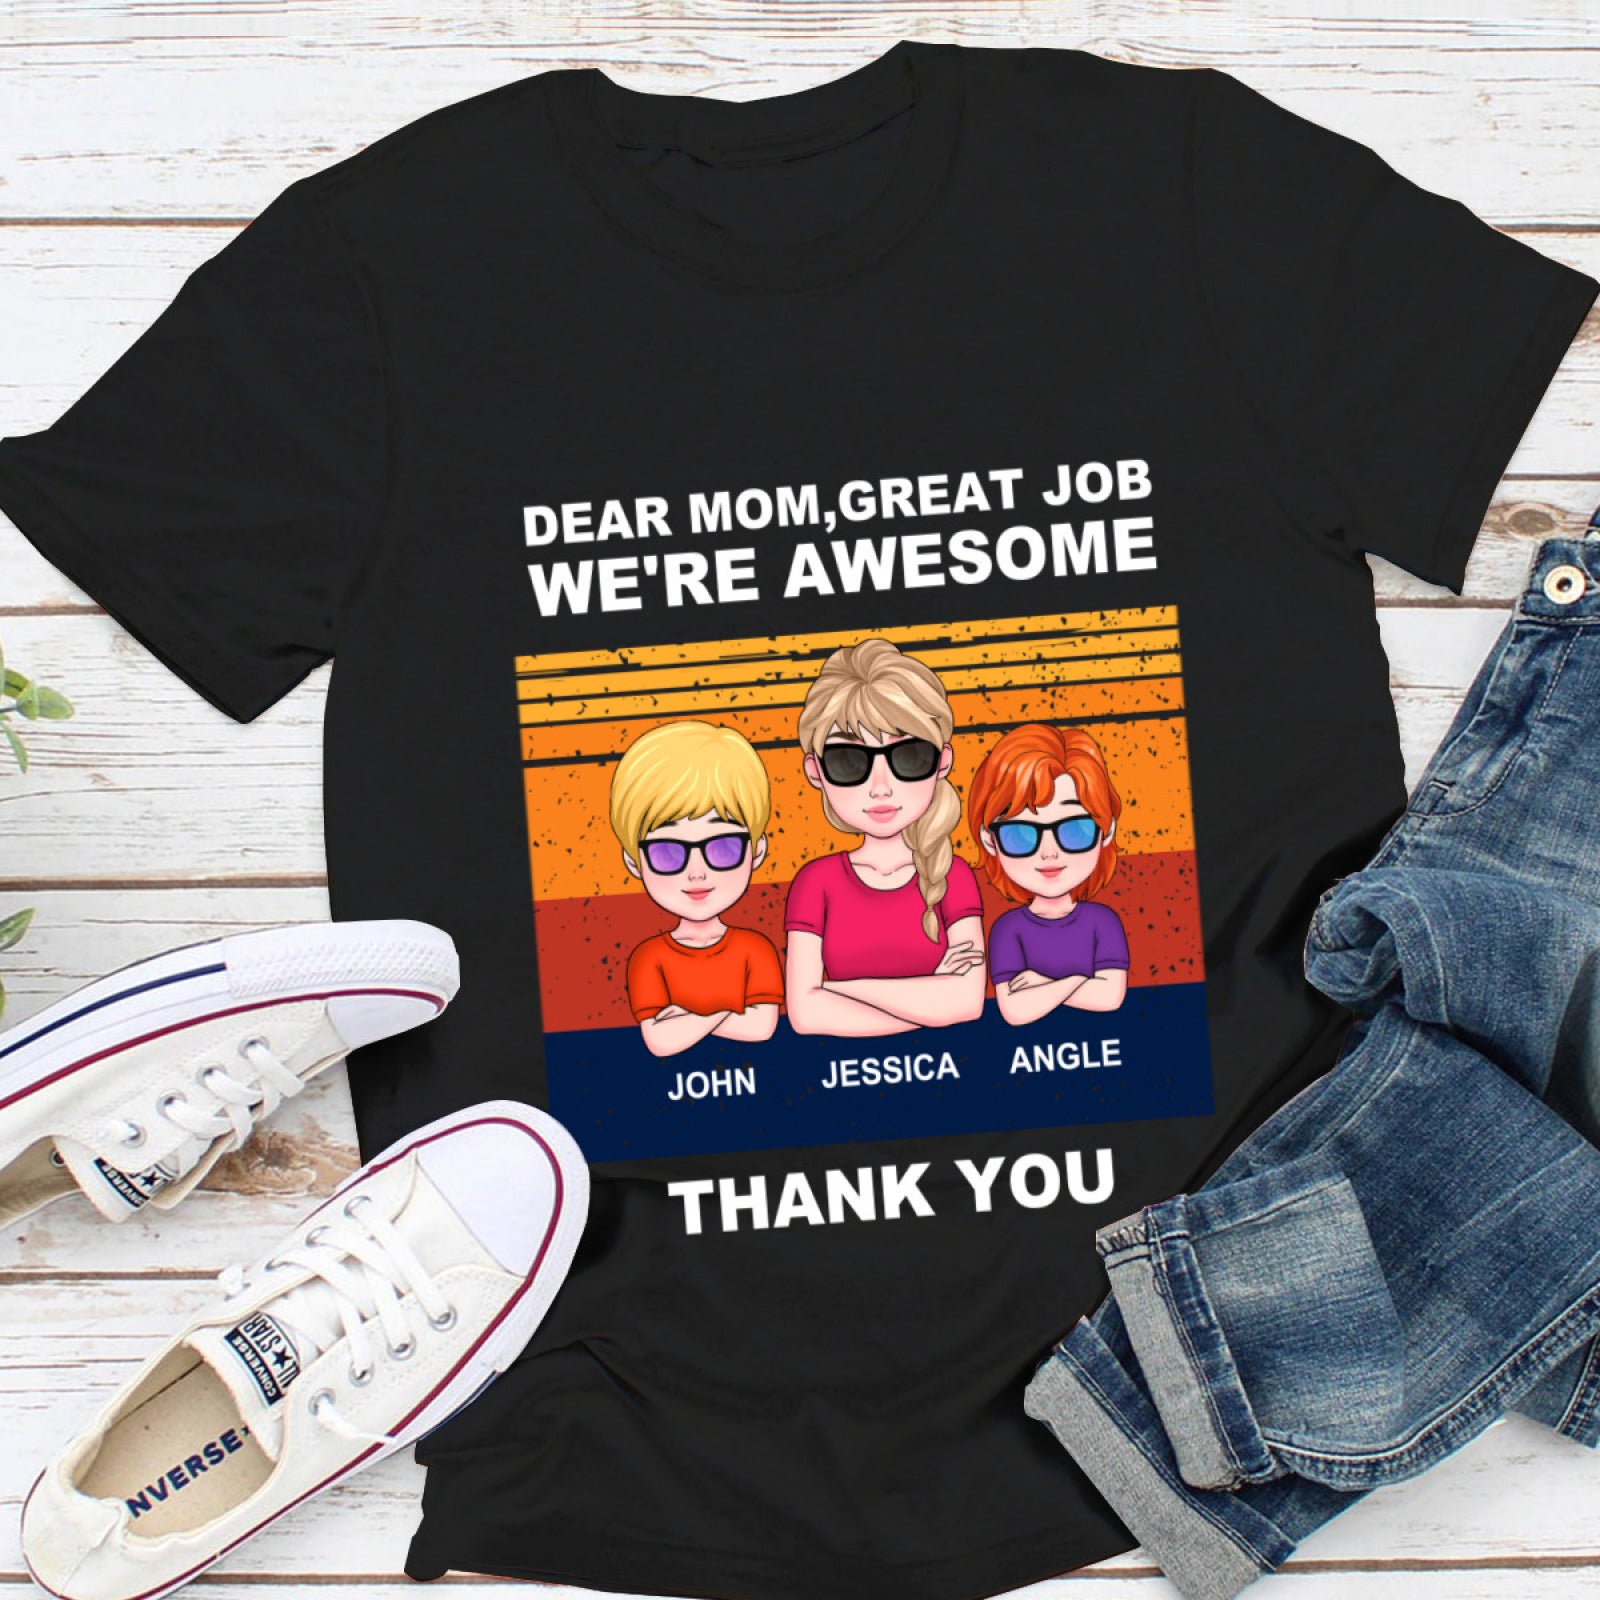 Personalized Custom T-Shirts For Women - Gifts For Mom, Mother's Day Gifts - colorfulcustom